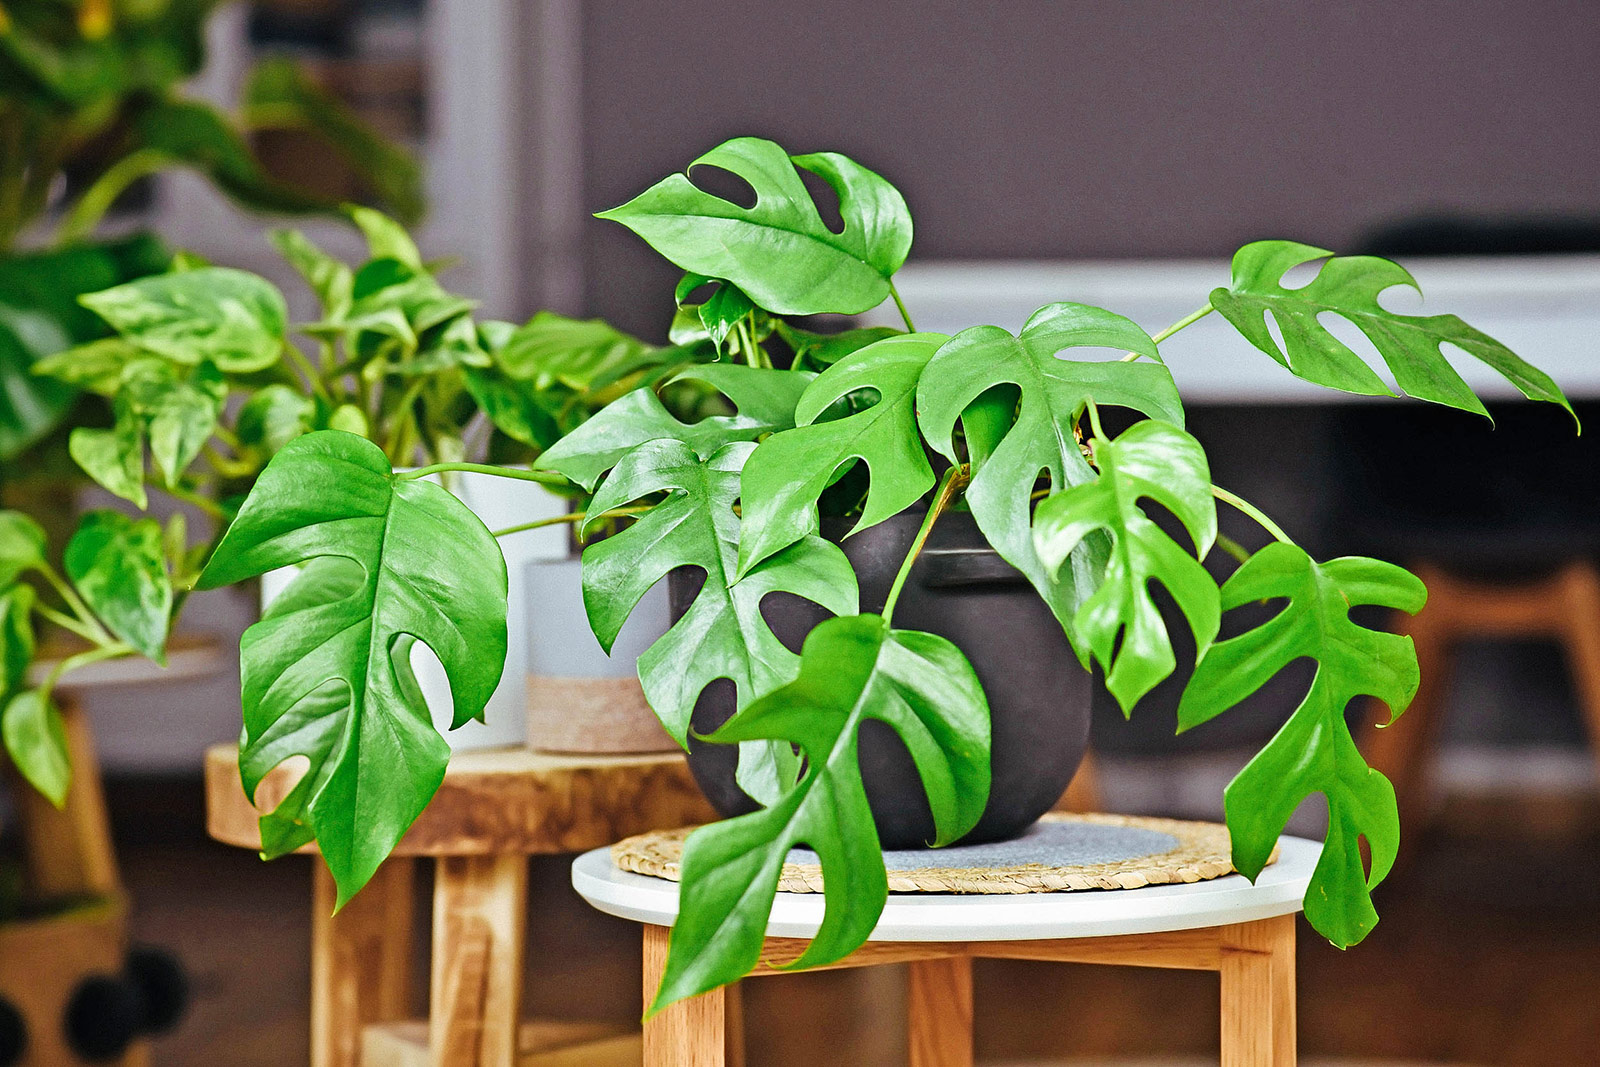 Rhaphidophora tetrasperma houseplant (mini Monstera) in a black ceramic pot on a side table, with more tropical houseplants in the background